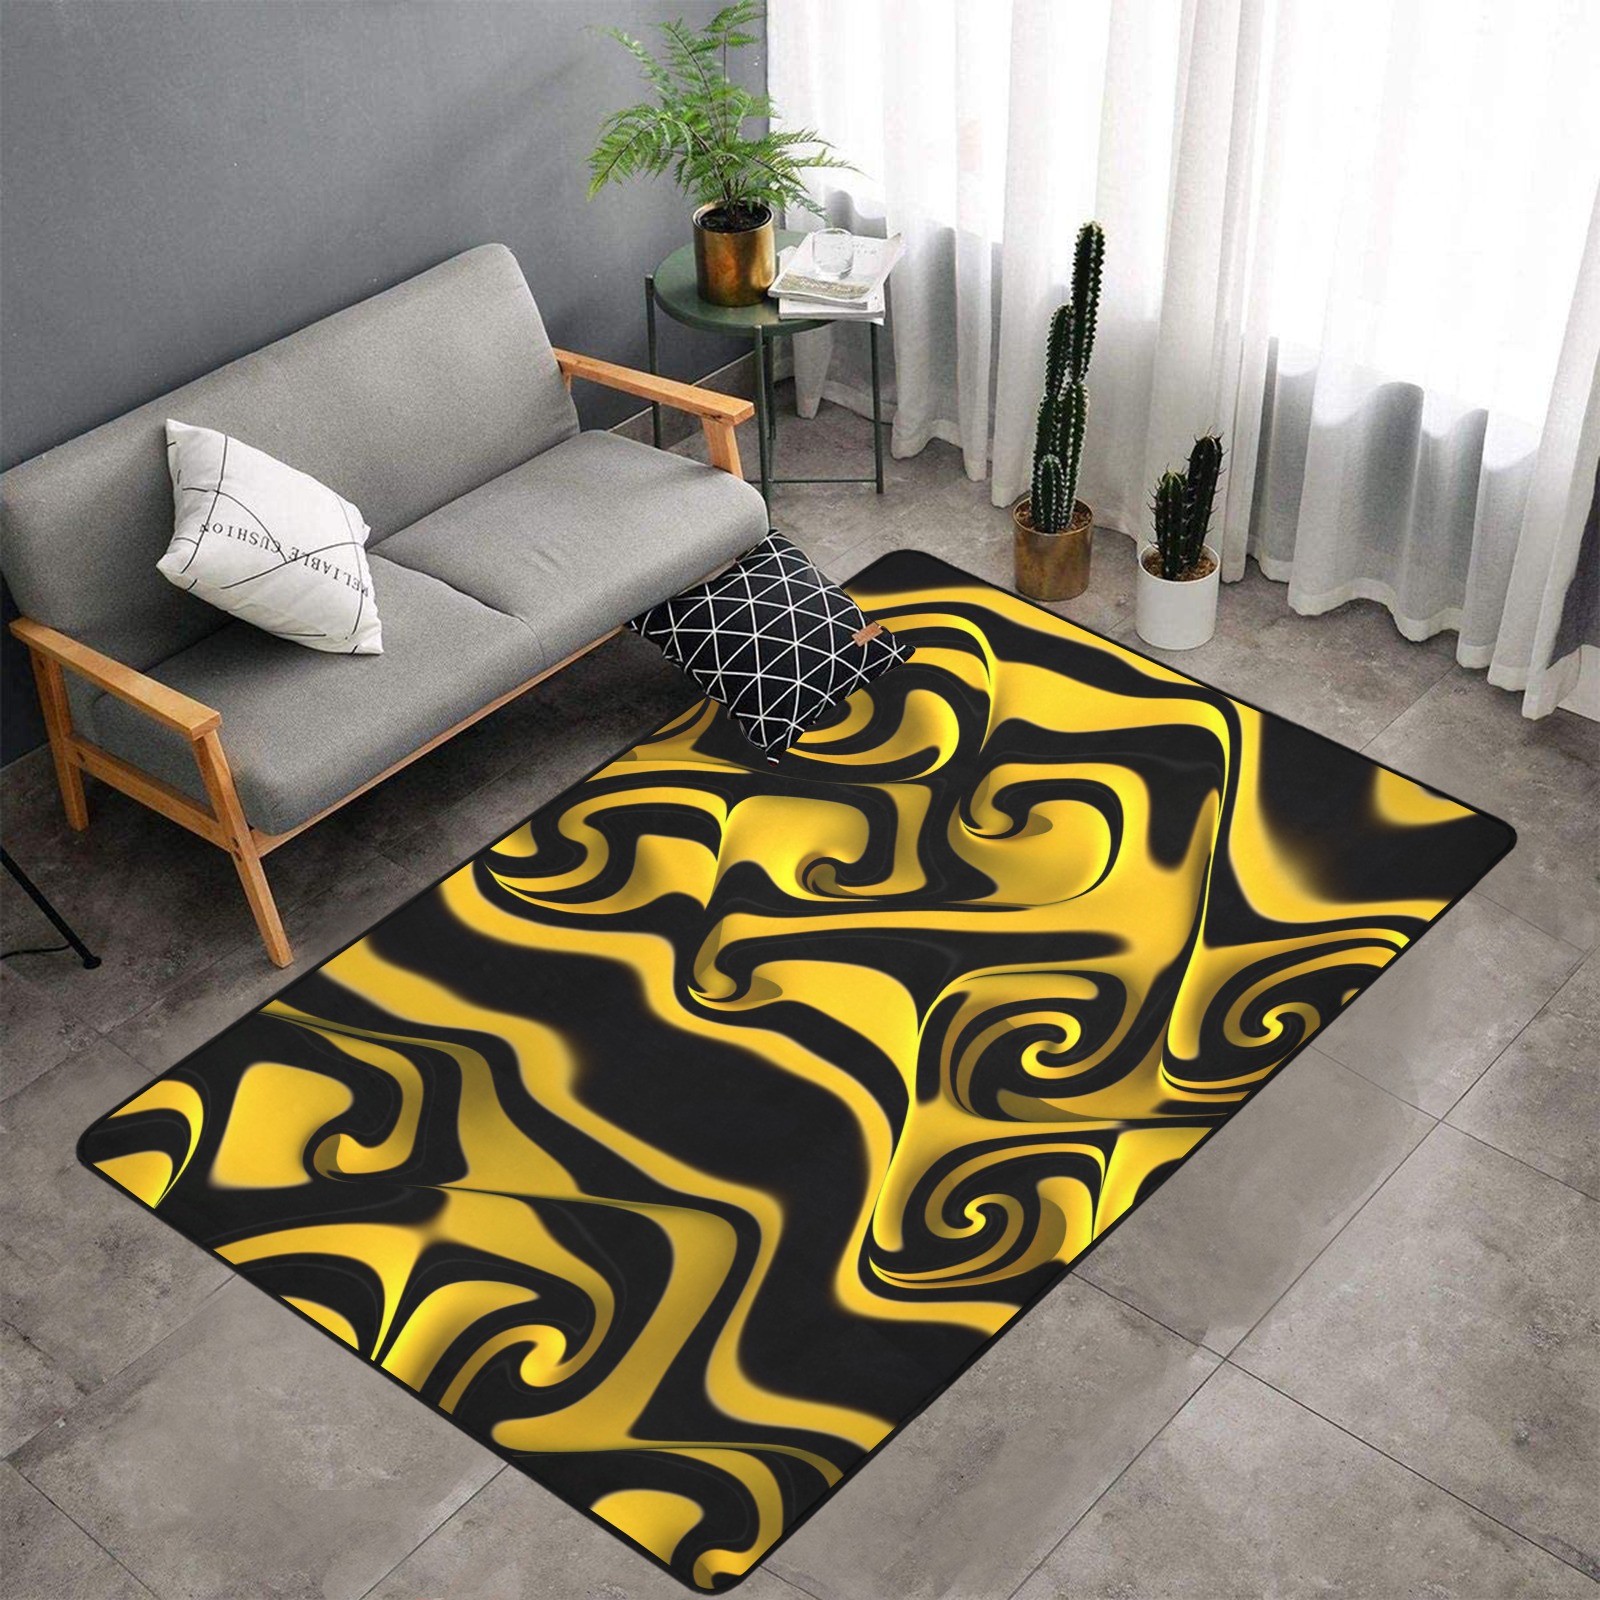 Gnarly - Yellow/Black Area Rug with Black Binding 7'x5'